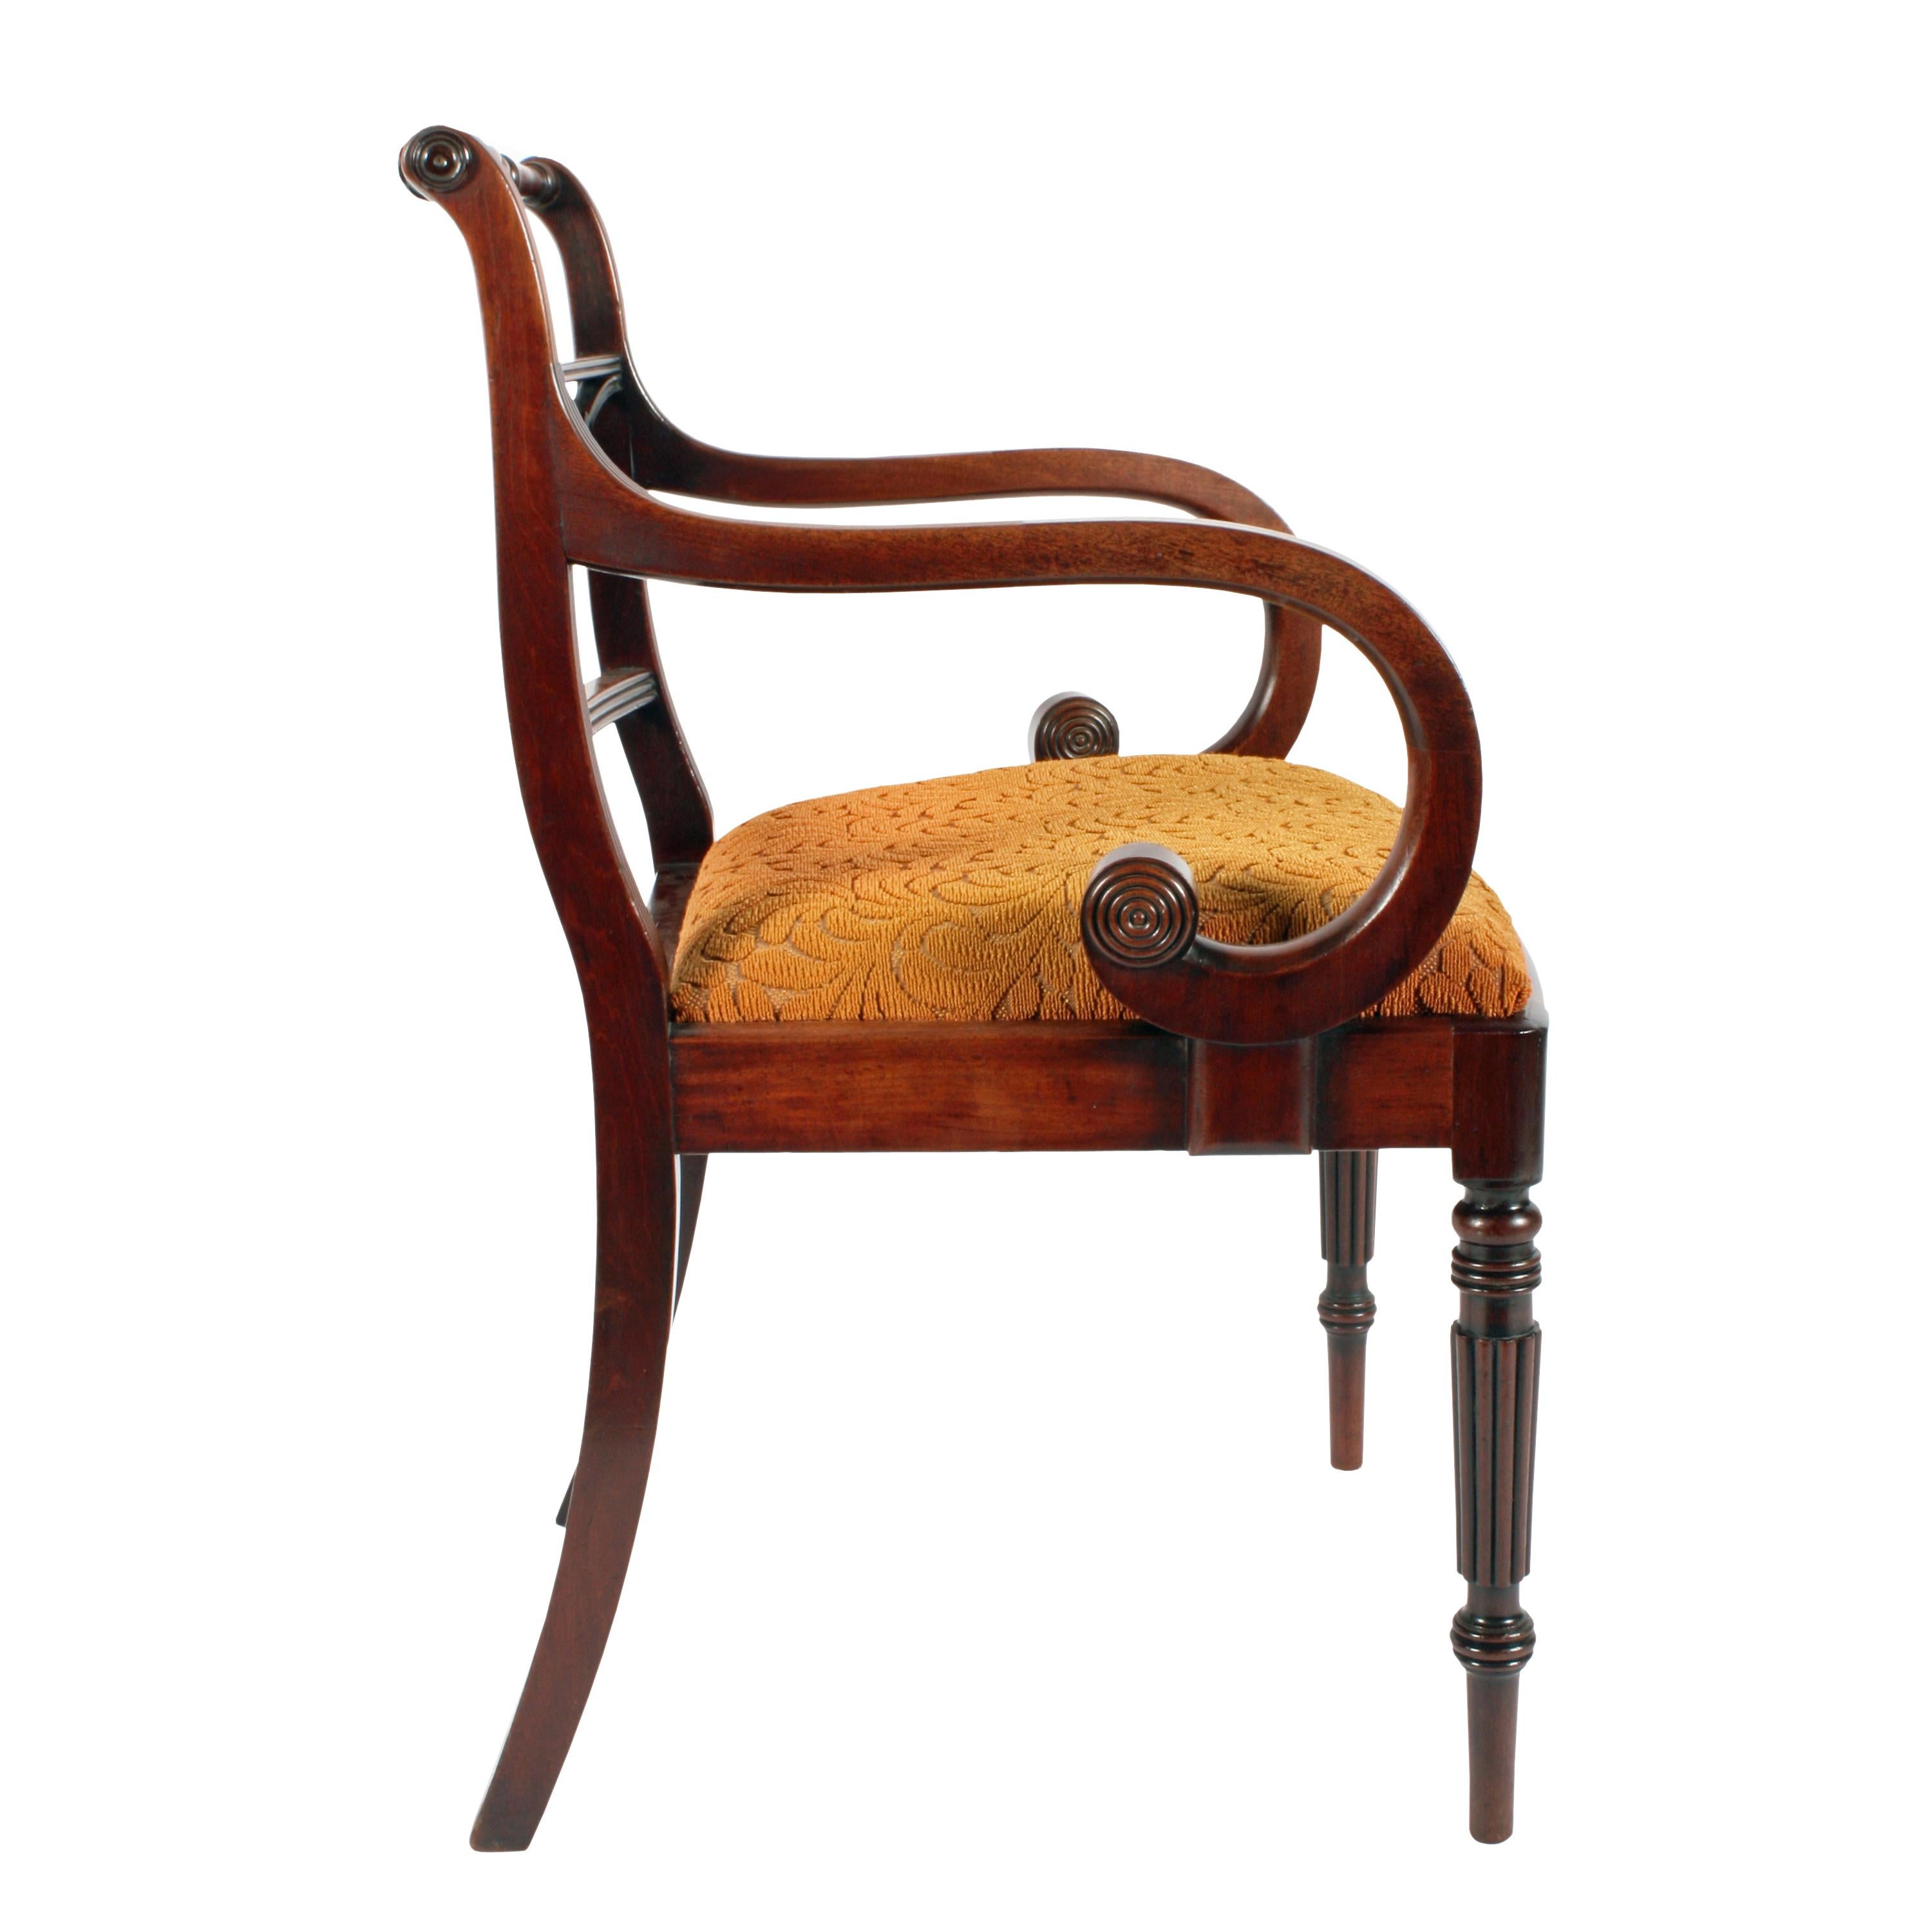 Early 19th Century Regency 'Gillows' Design Elbow Chair